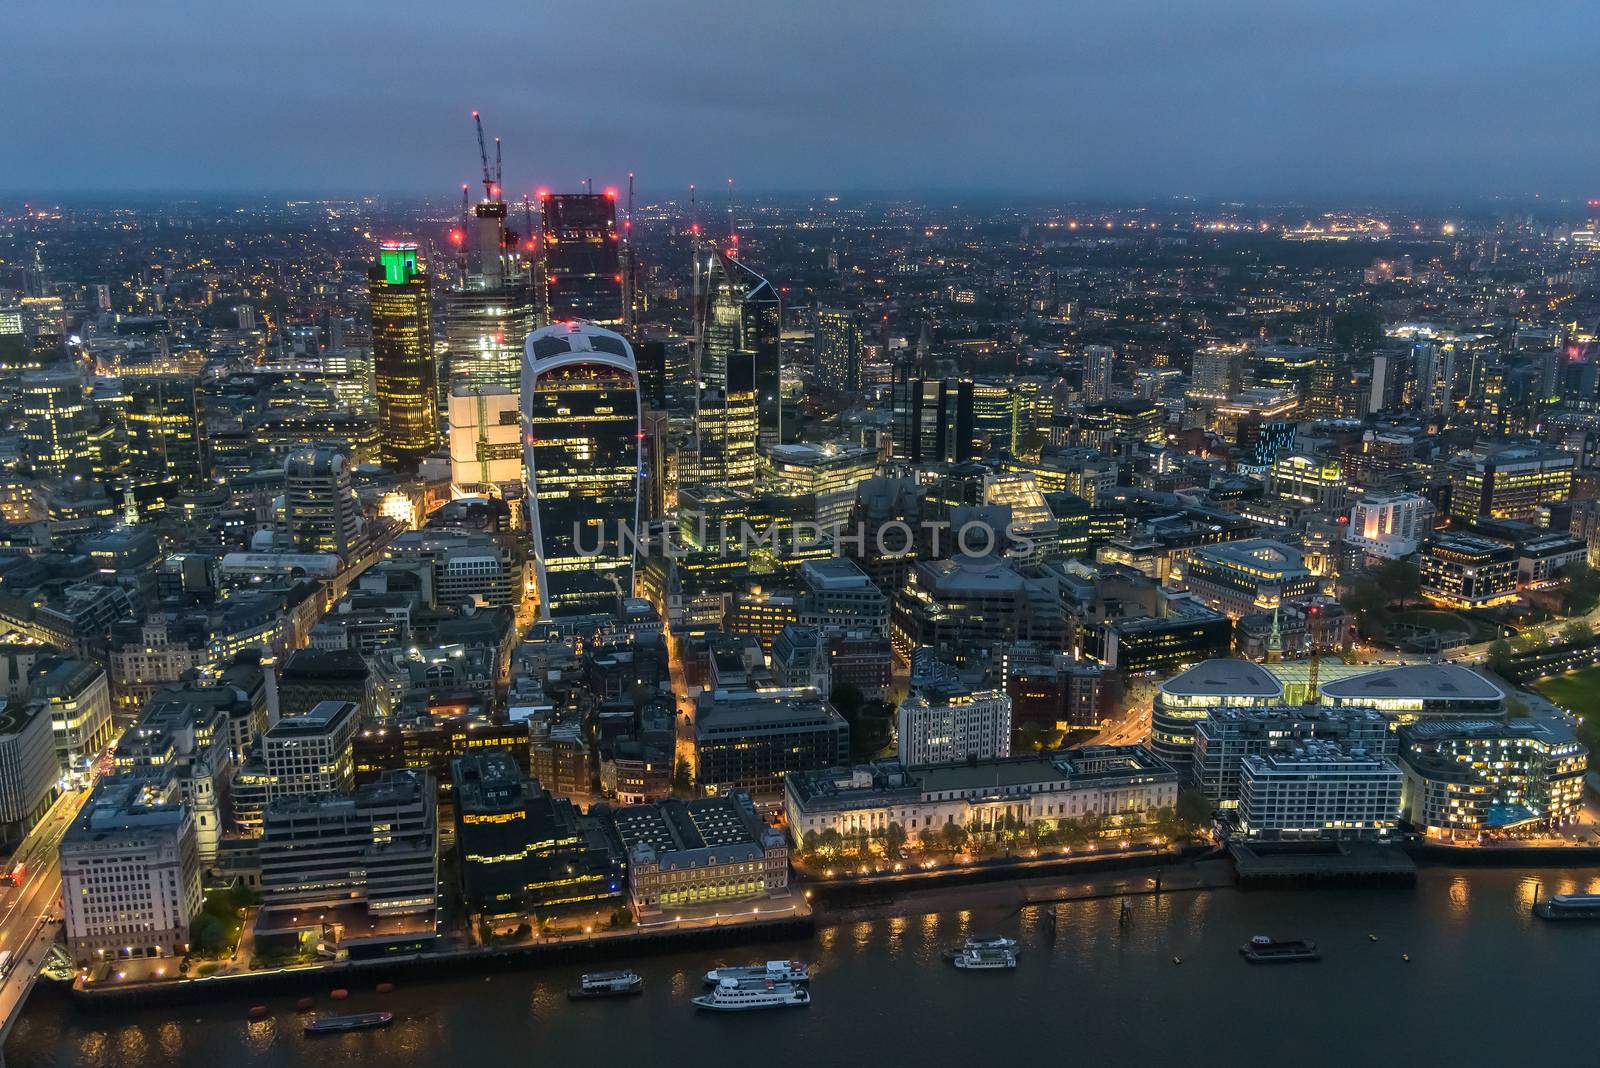 Aerial view of City of London at night by mkos83